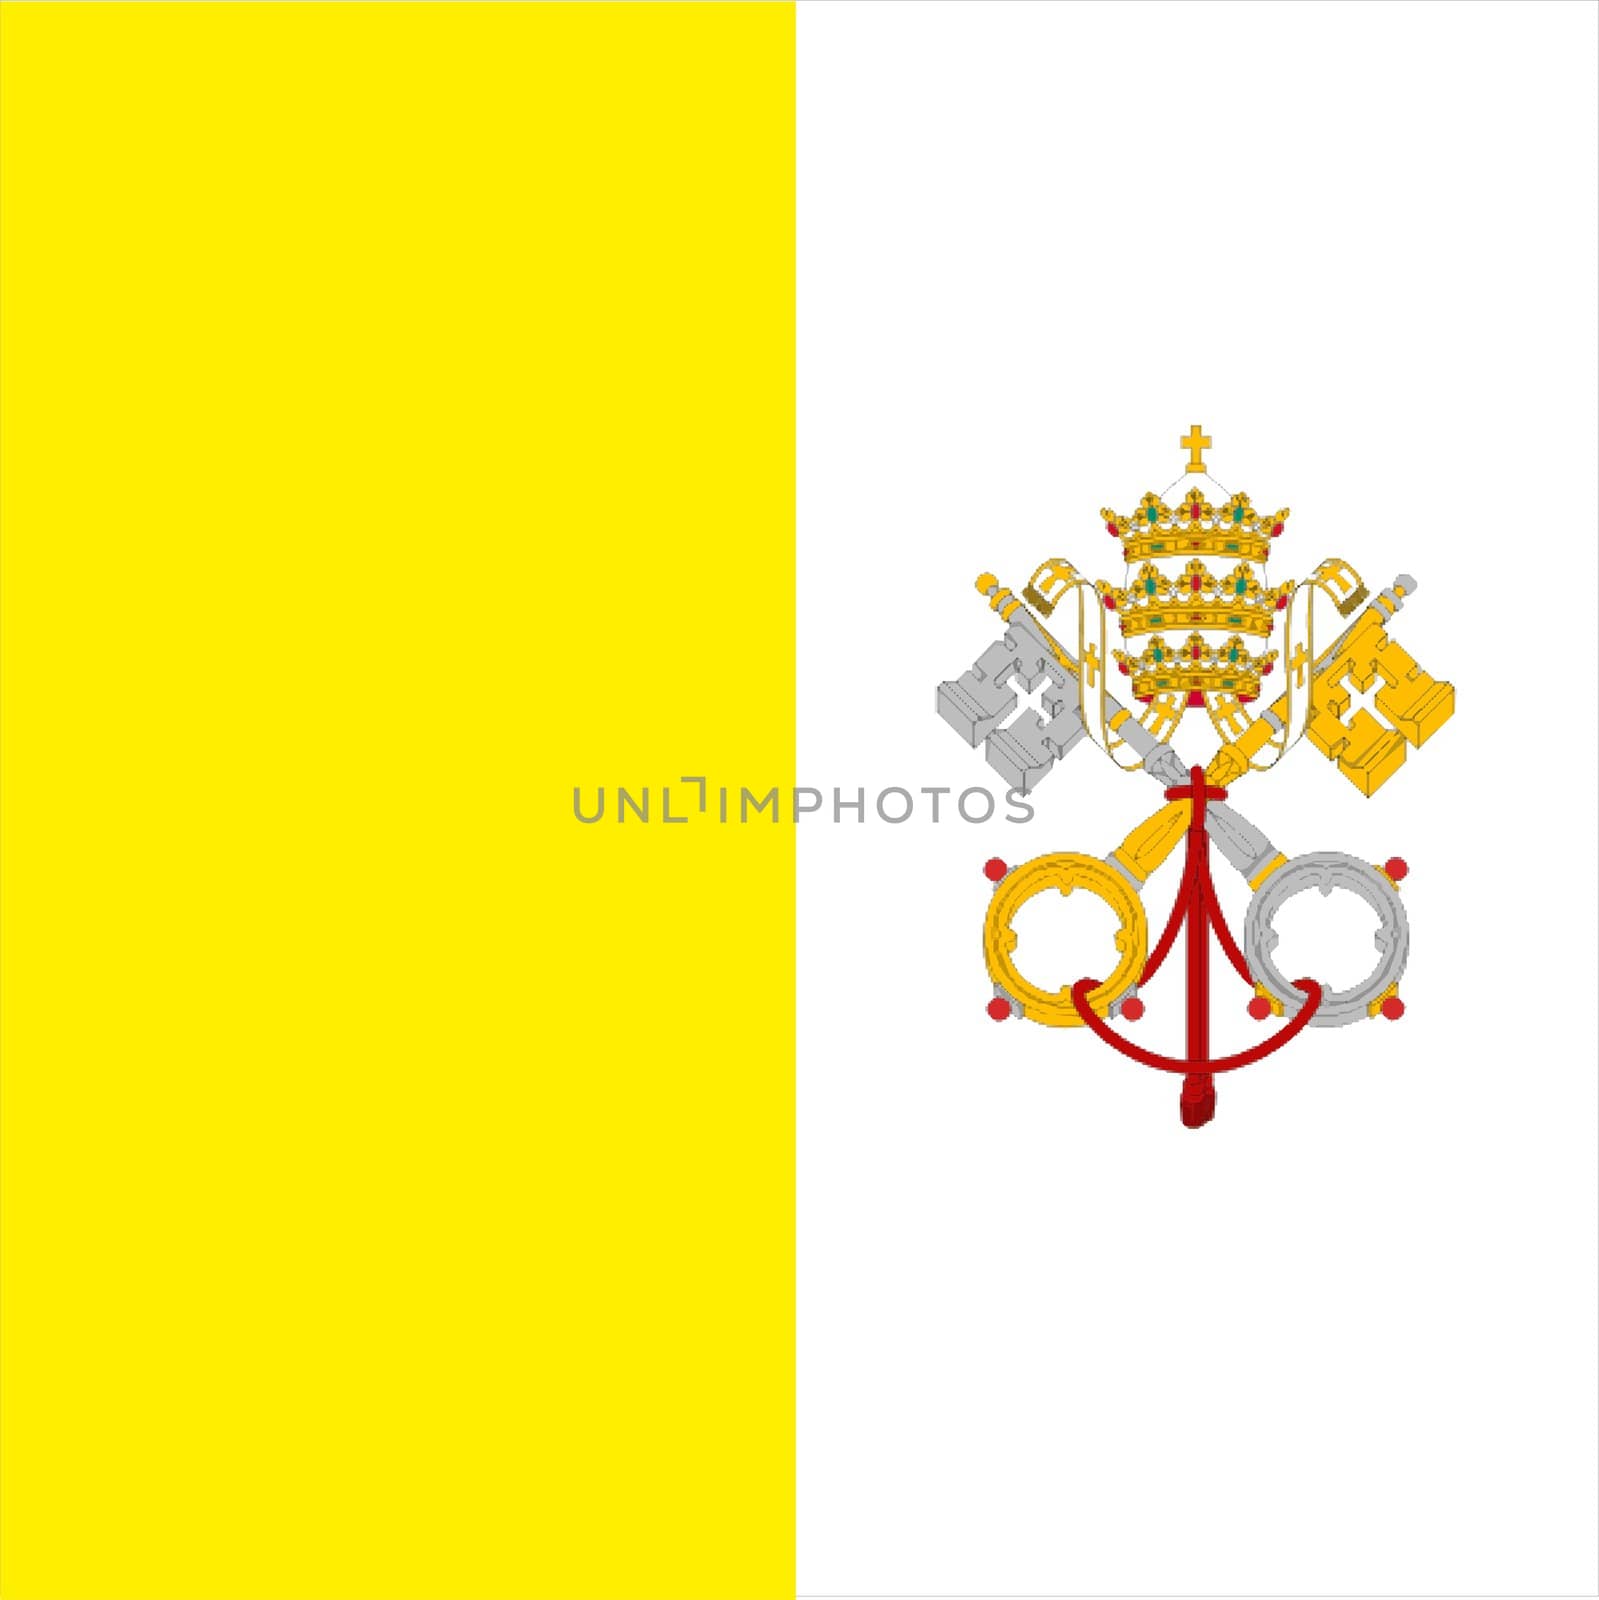 2D illustration of the flag of Vatican